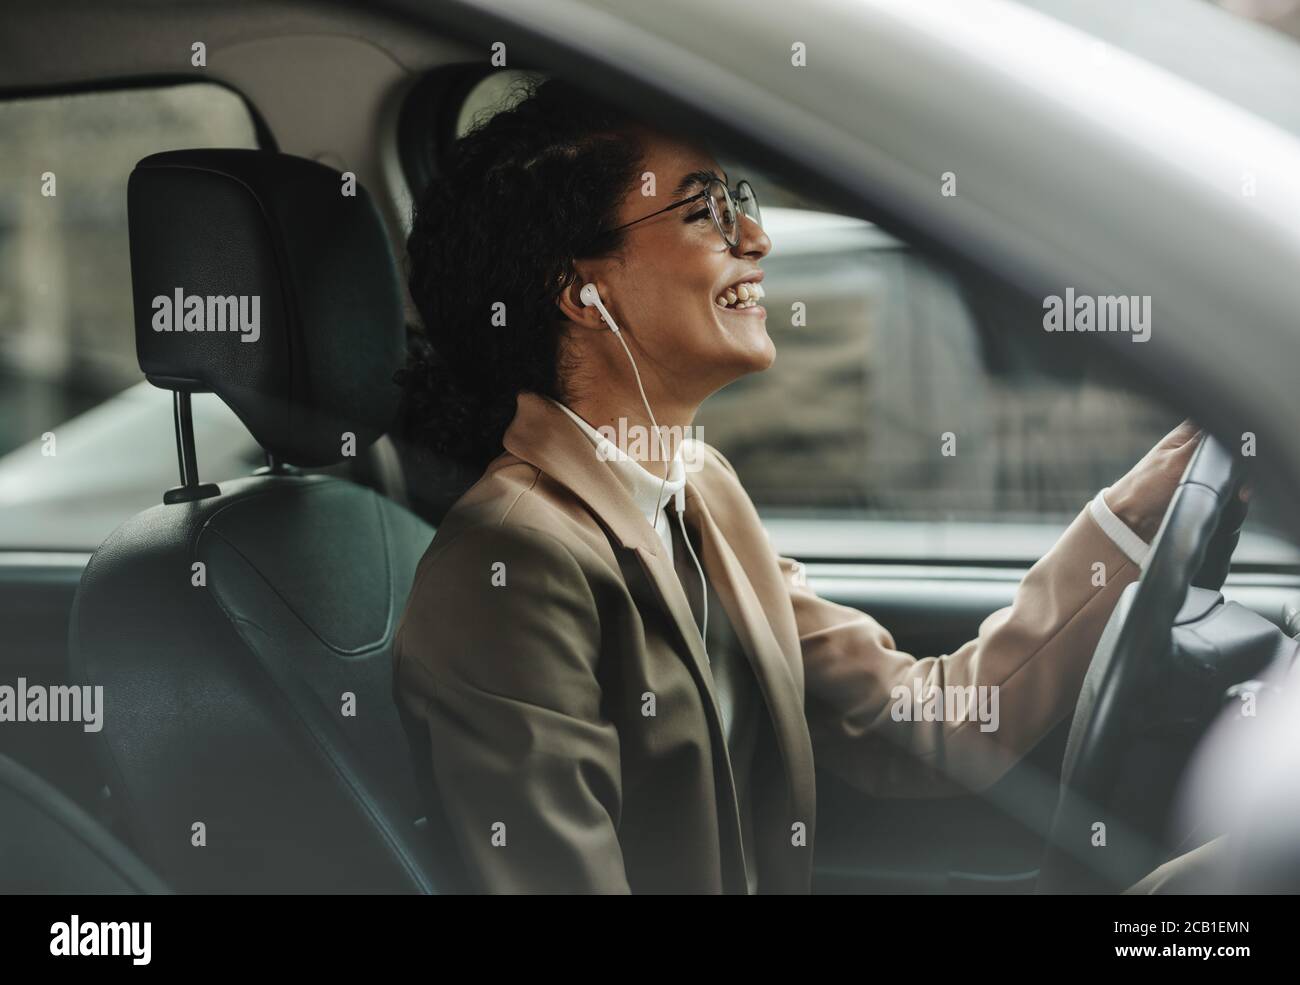 Businesswoman with earphones driving her car to office and smiling. Woman enjoying listening to music while driving to work. Stock Photo